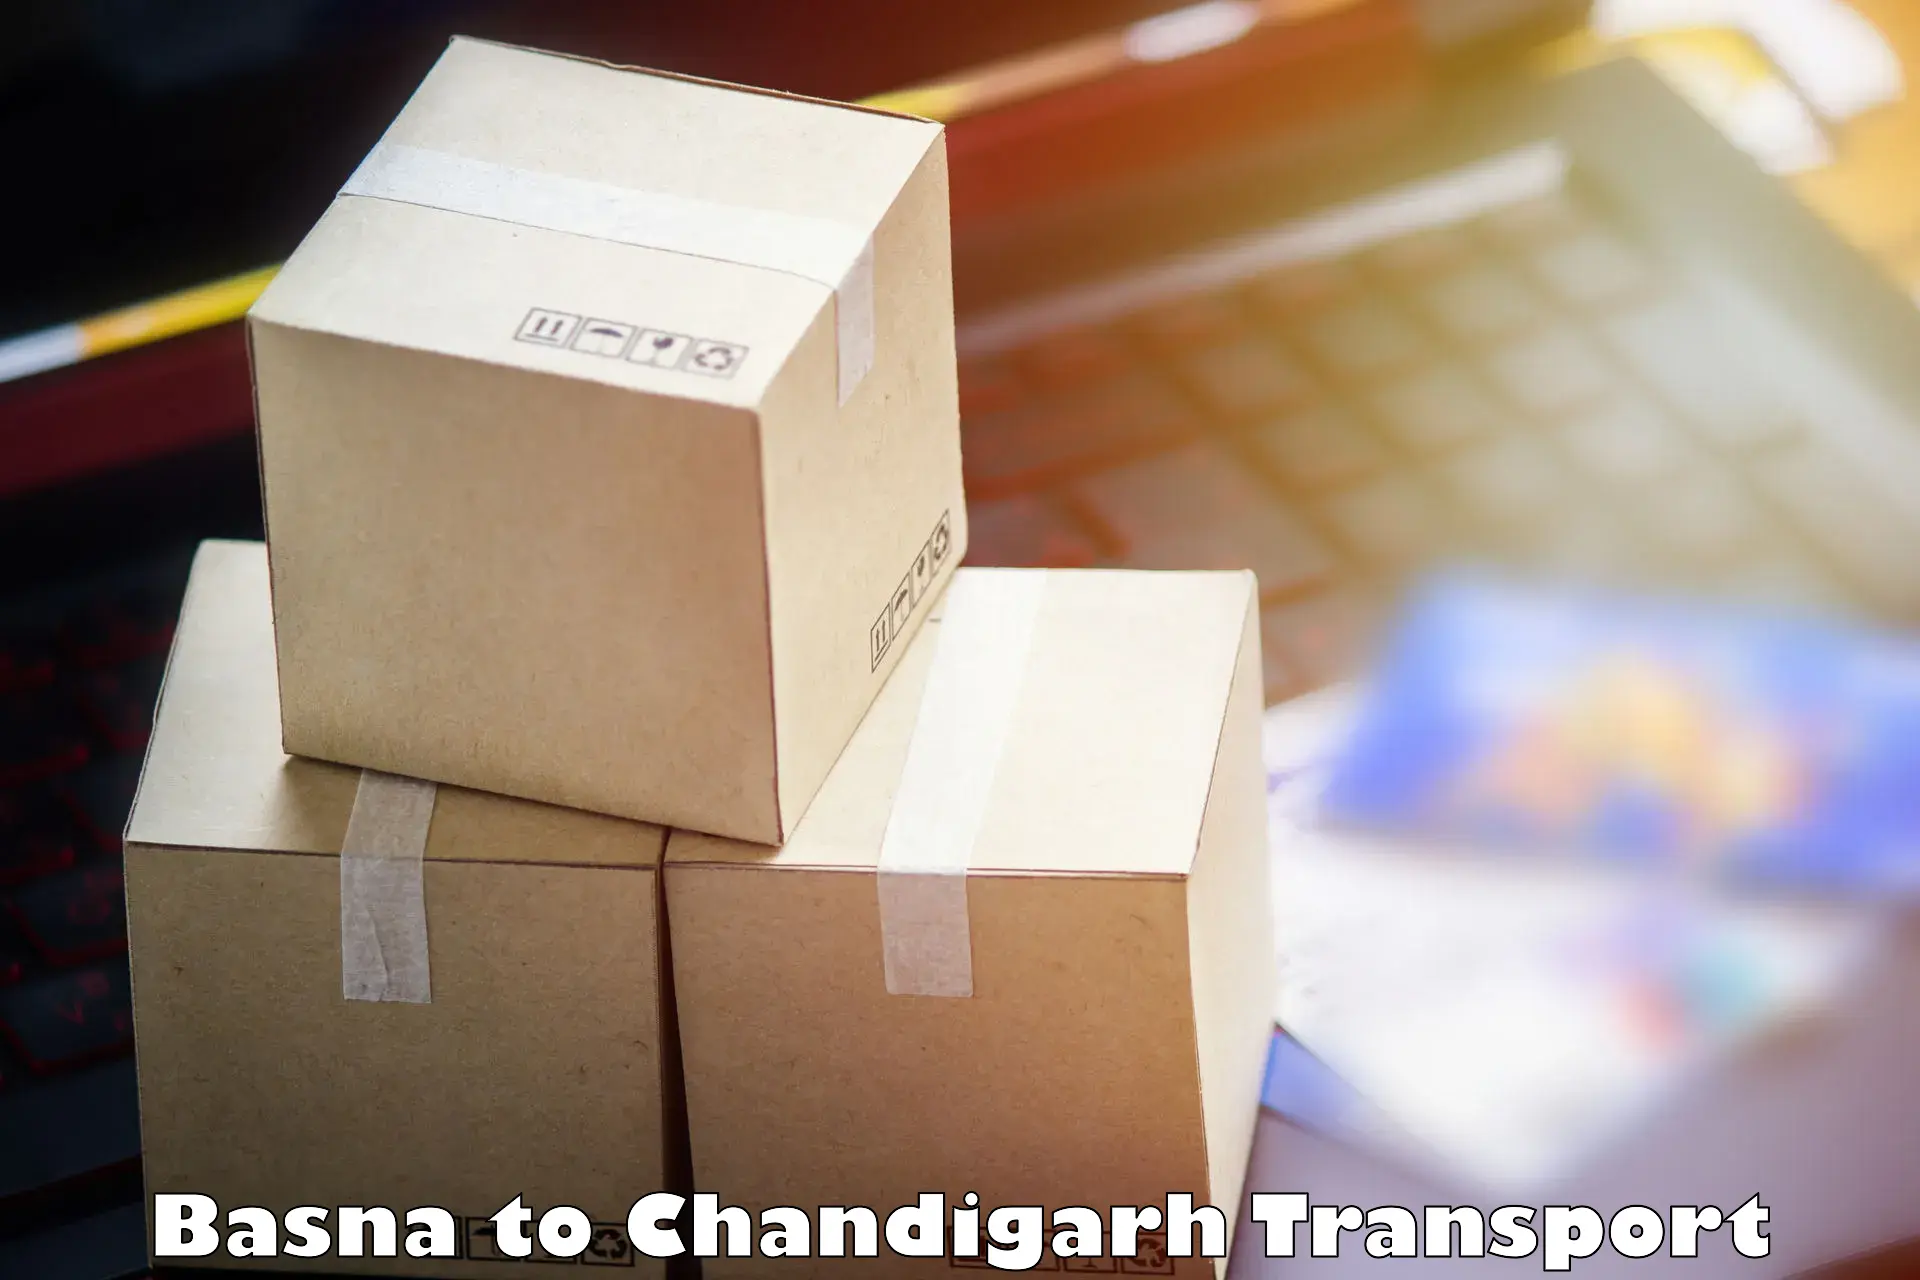 Truck transport companies in India Basna to Chandigarh